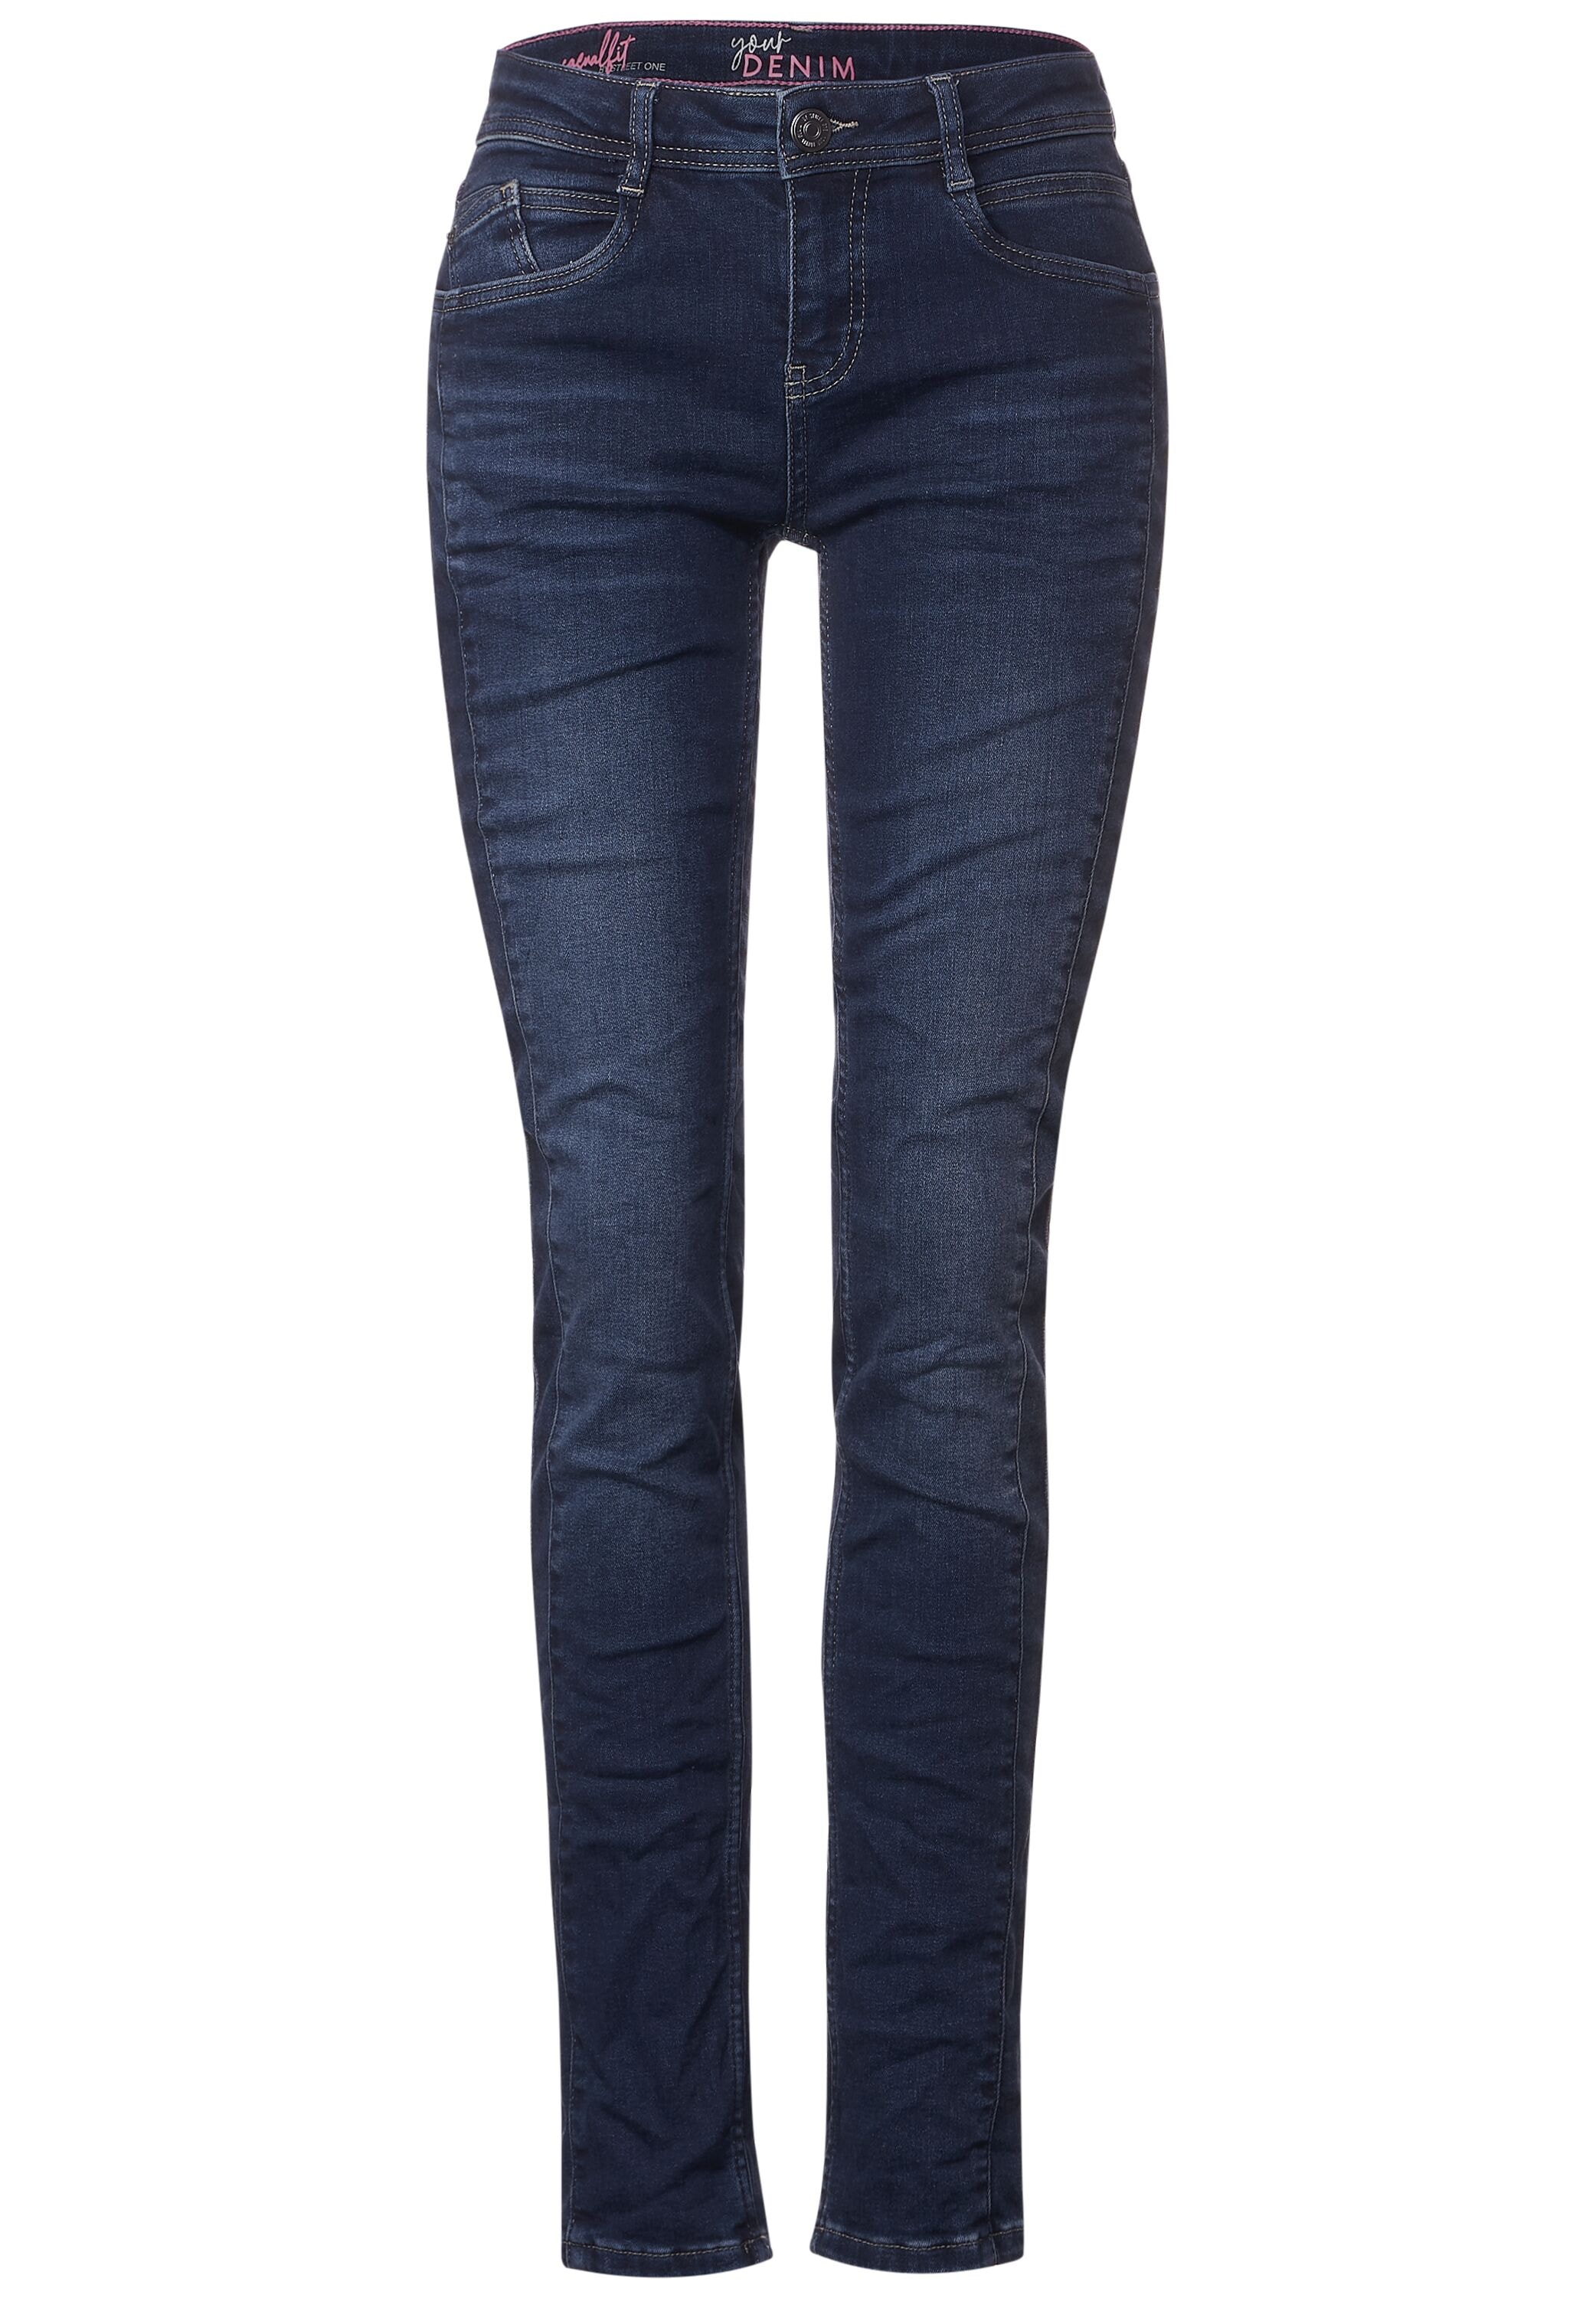 STREET ONE Thermojeans »Casual Fit Thermojeans Style Jane«, Wärmender Thermo-Effekt